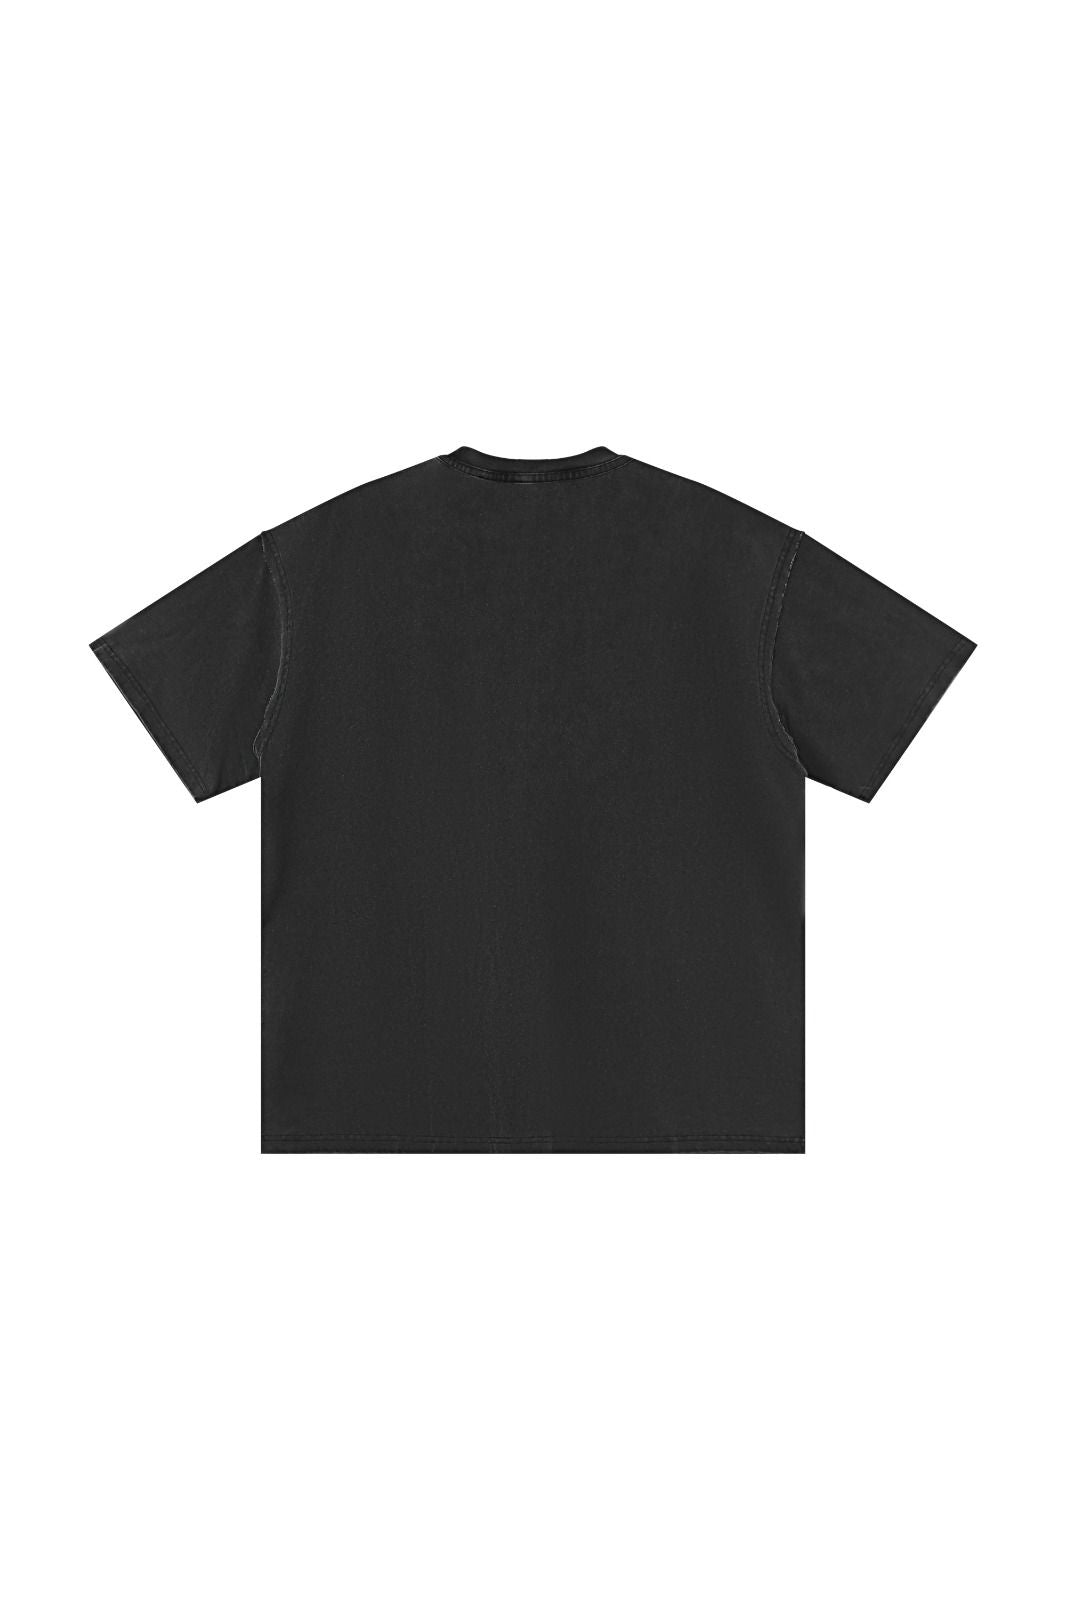 Aly Good Vibes - Washed Tee (Black)